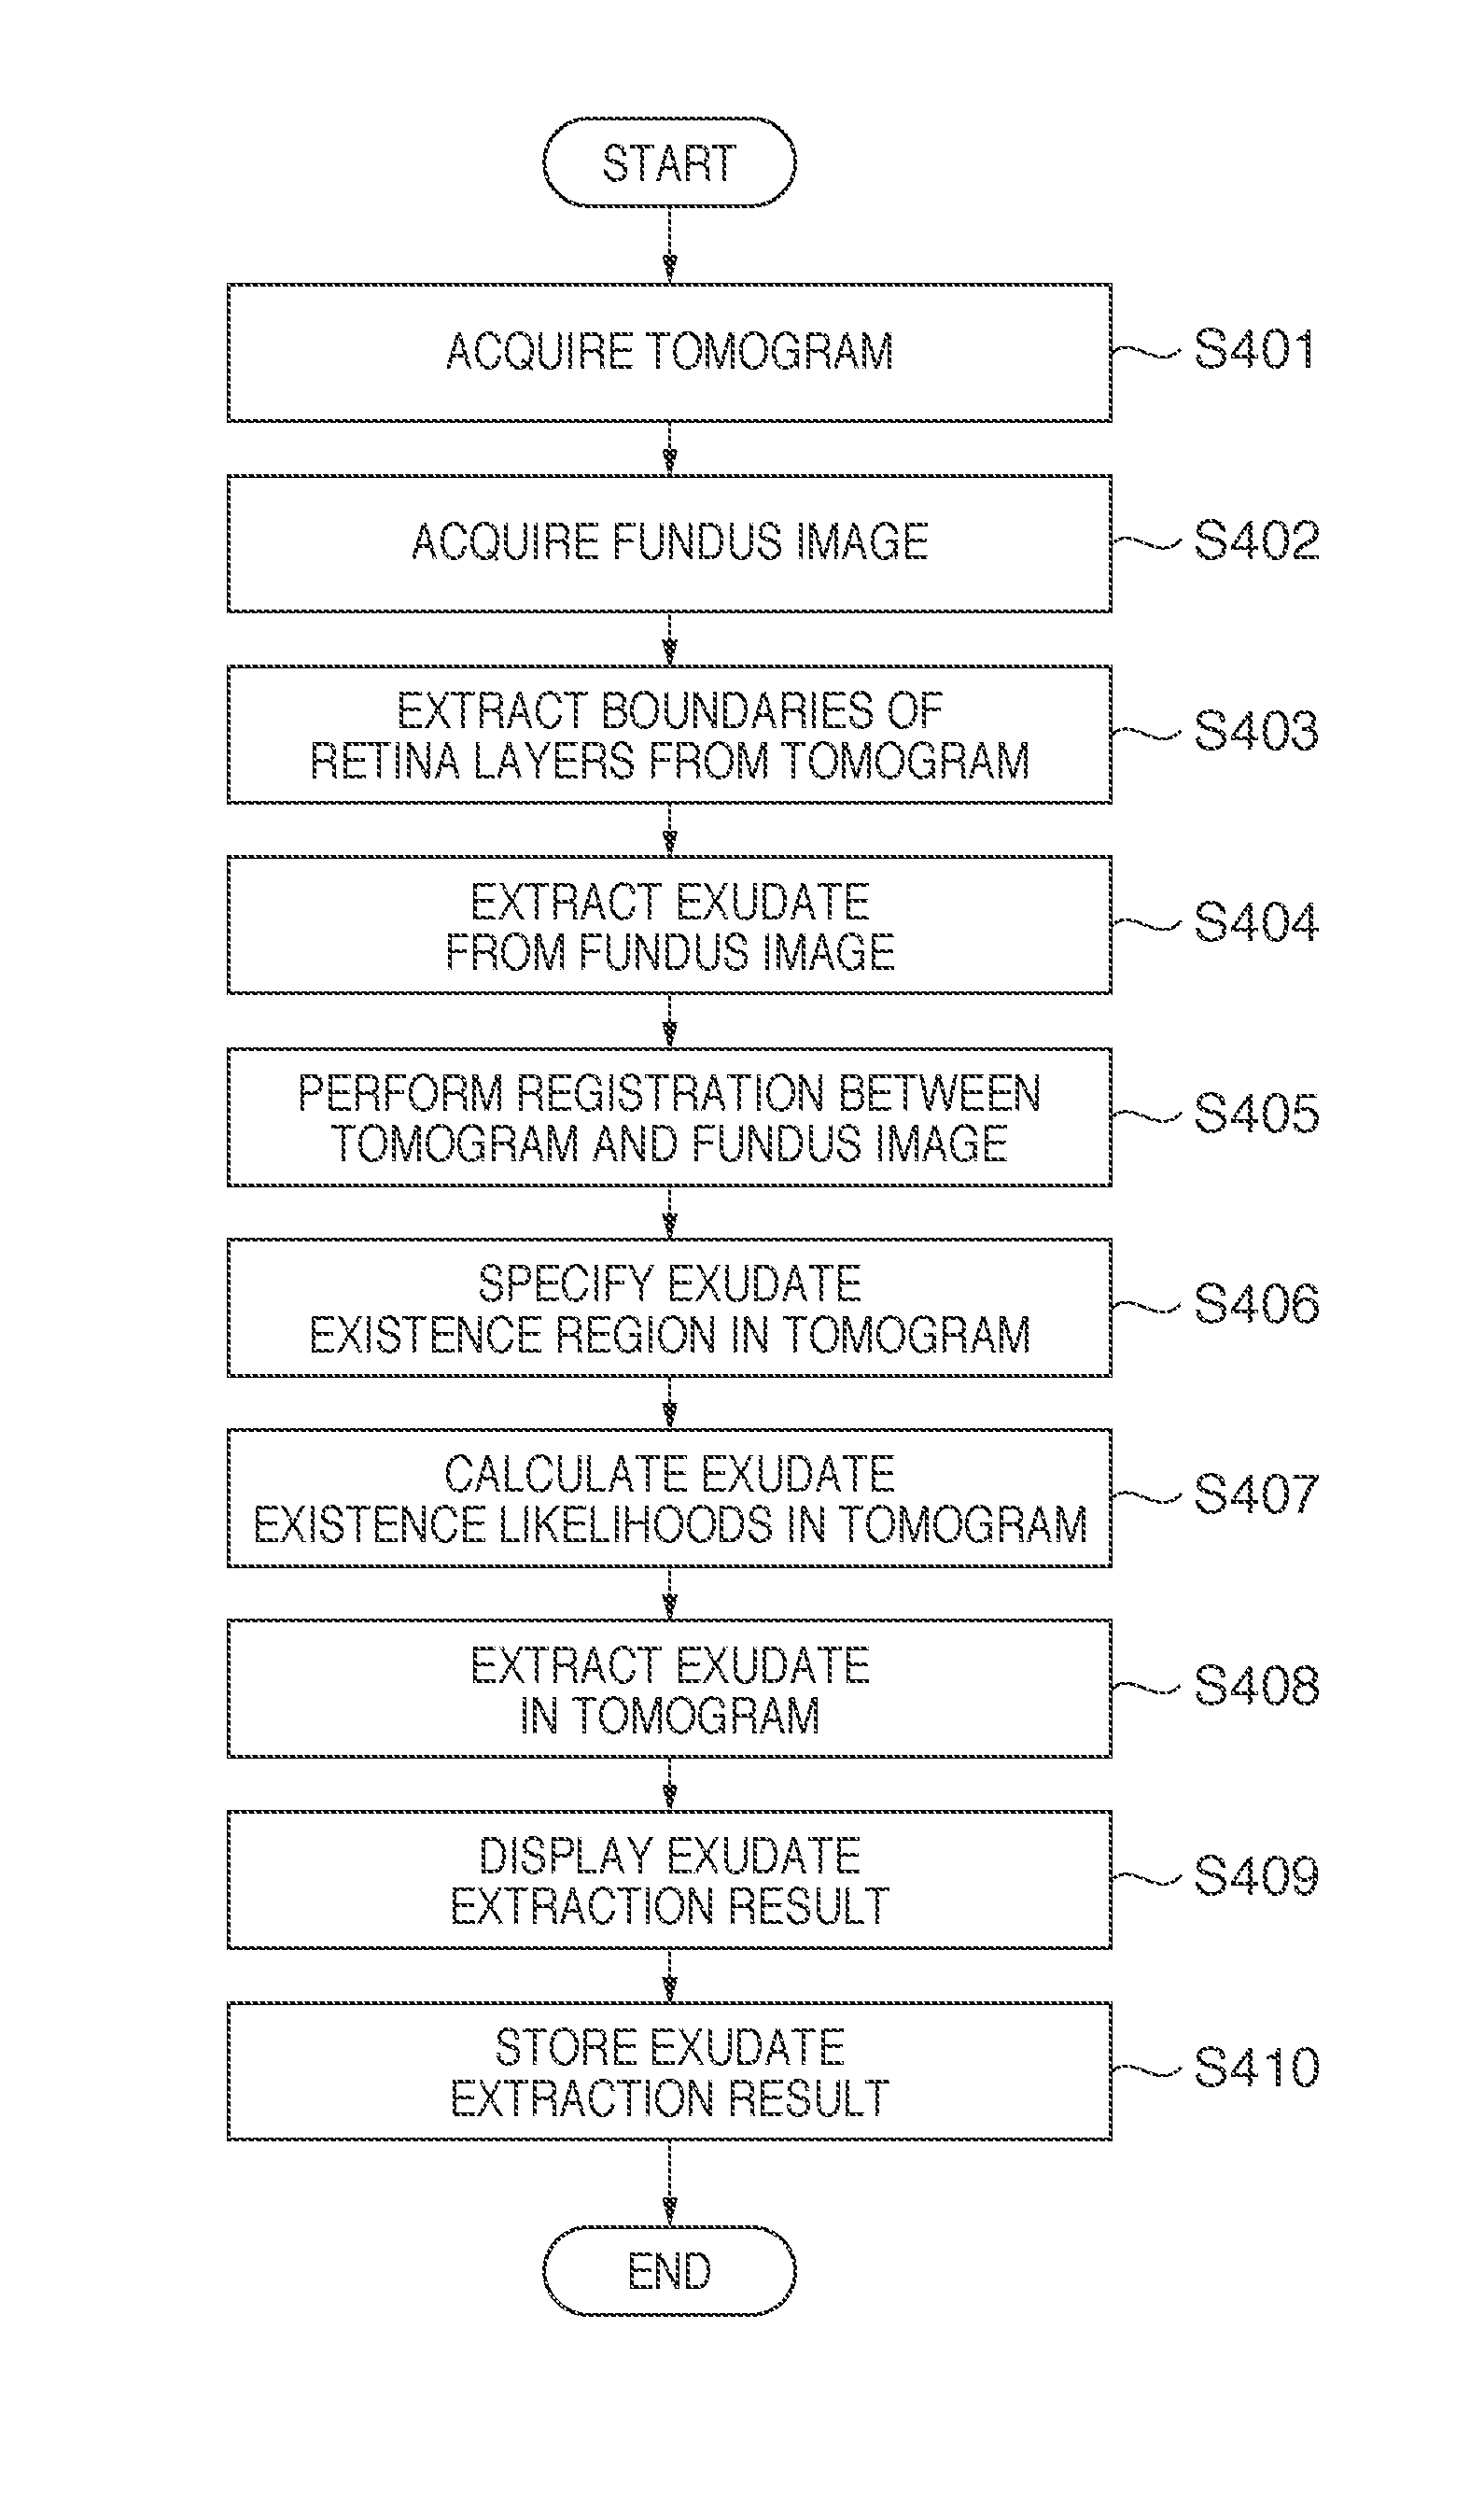 Image processing apparatus for processing a tomogram of an eye to be examined, image processing method, and computer-readable storage medium